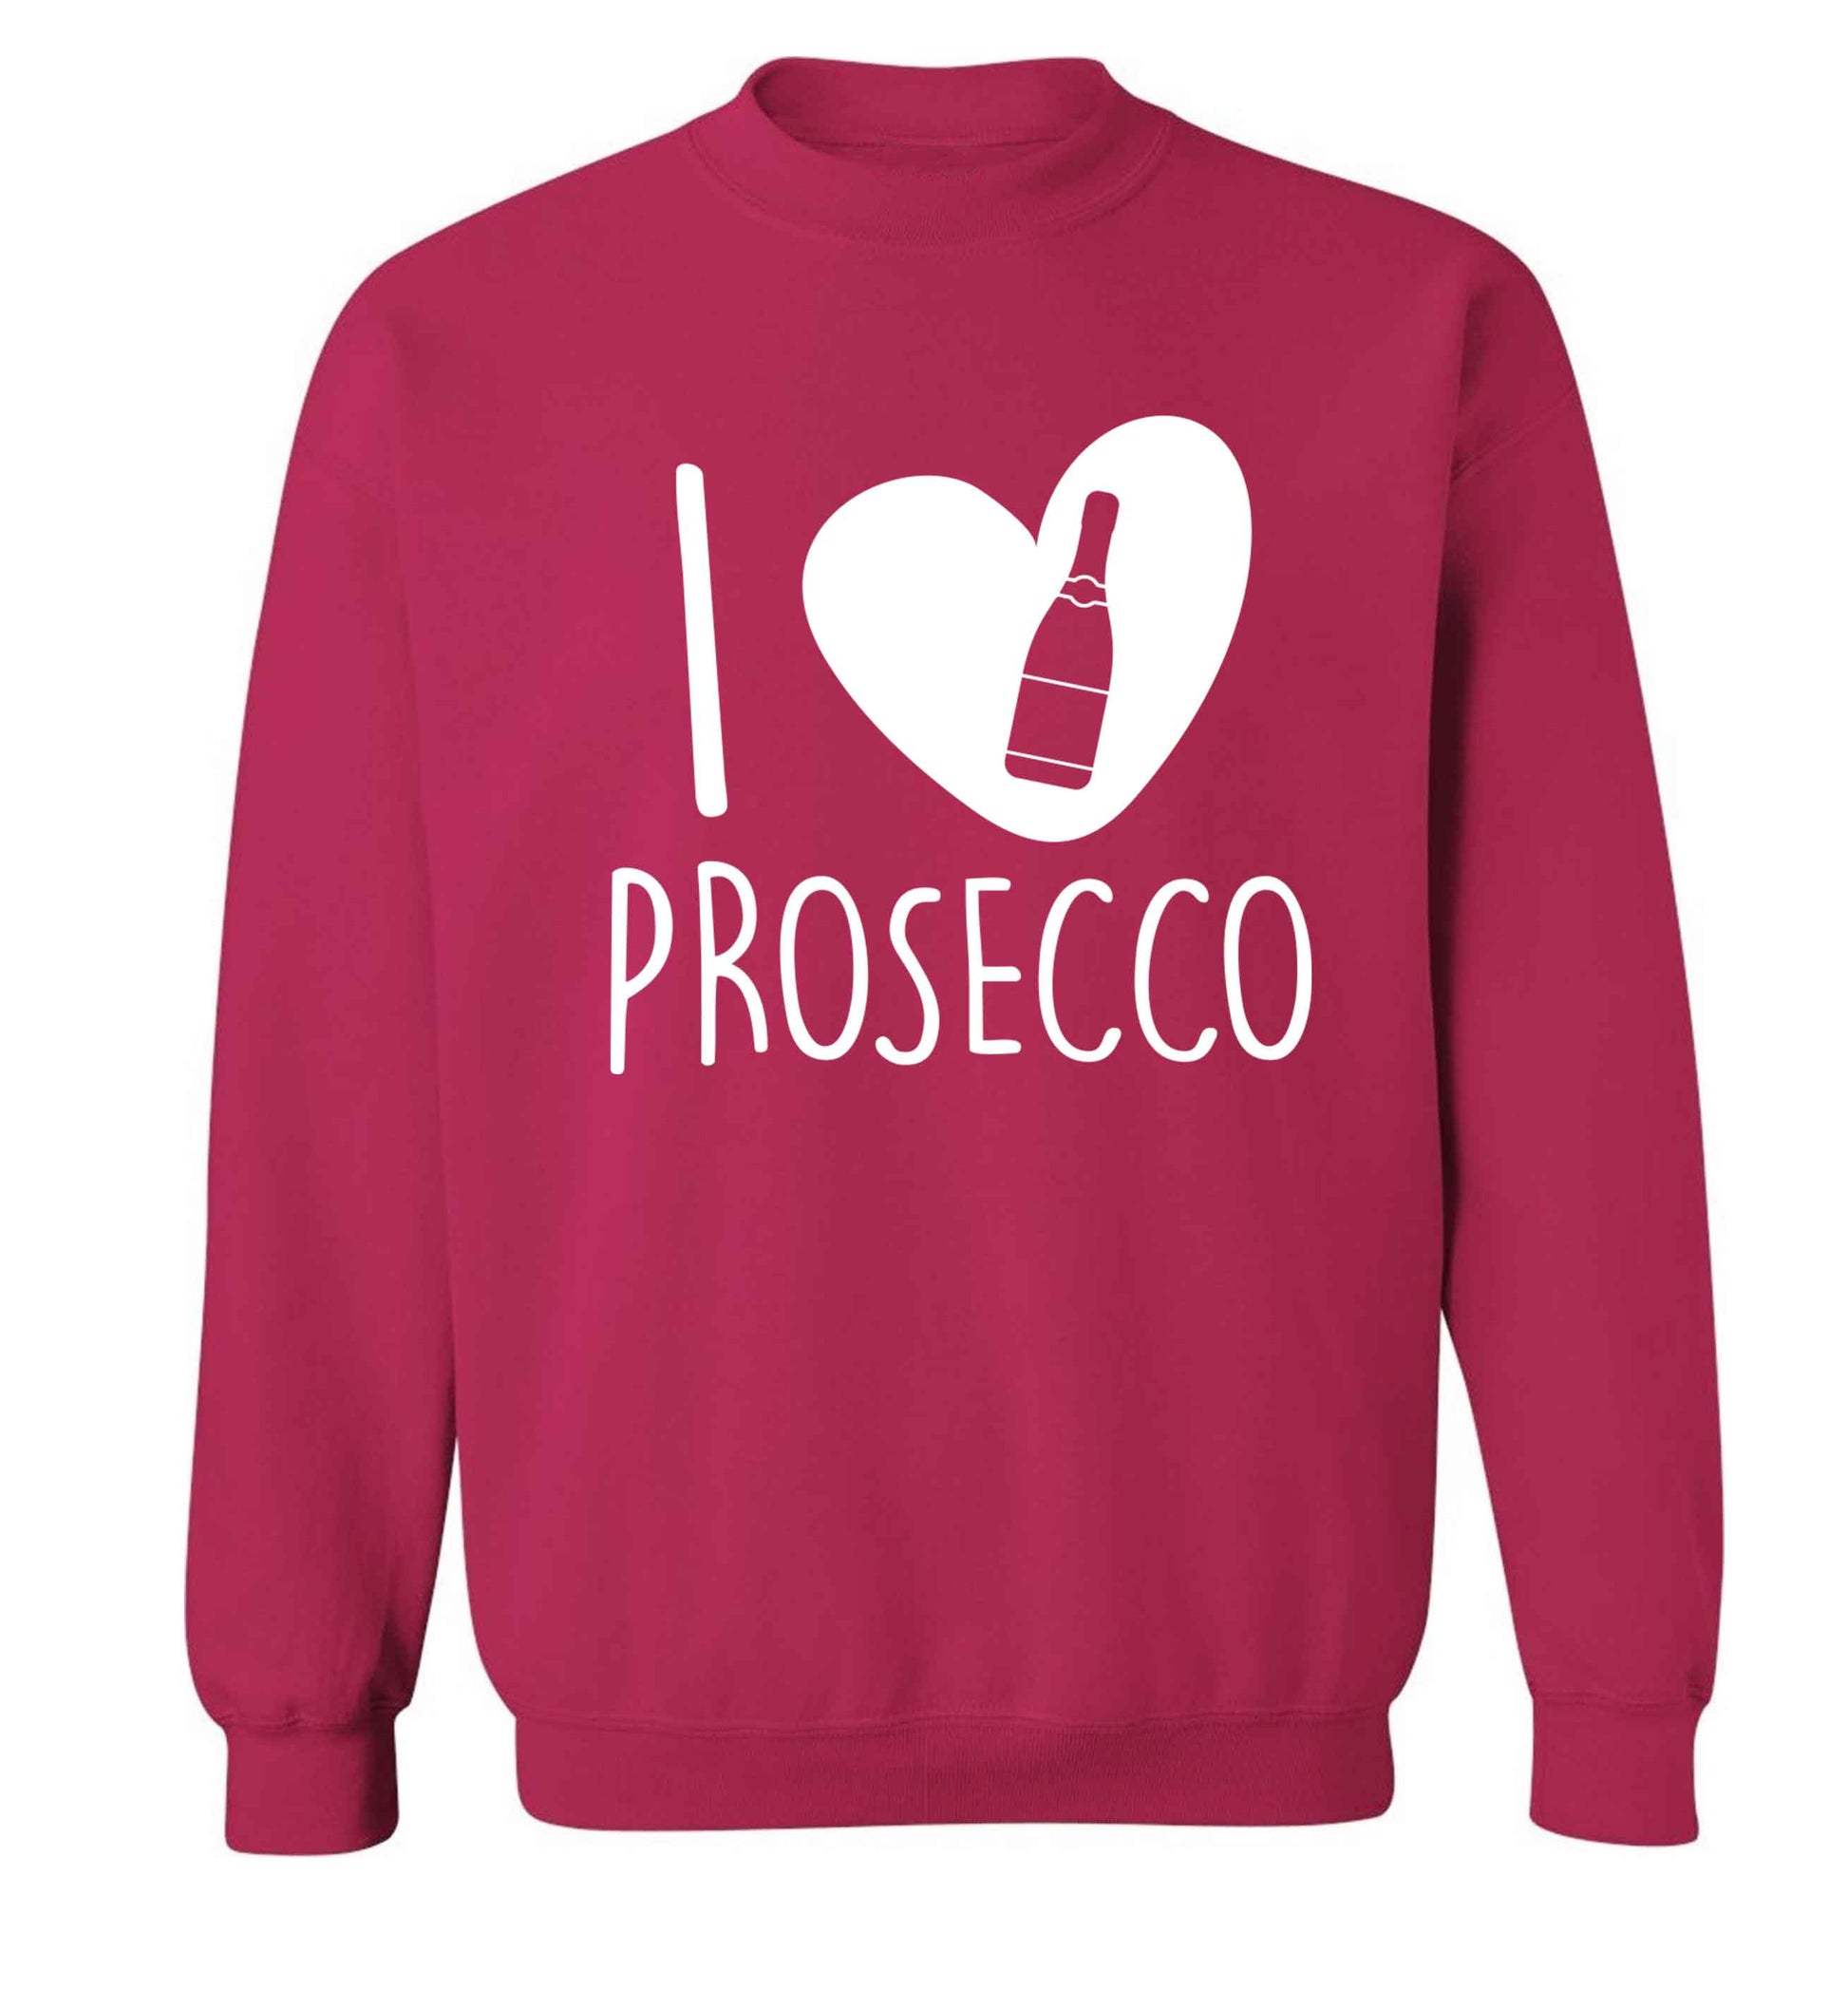 I love prosecco Adult's unisex pink Sweater 2XL